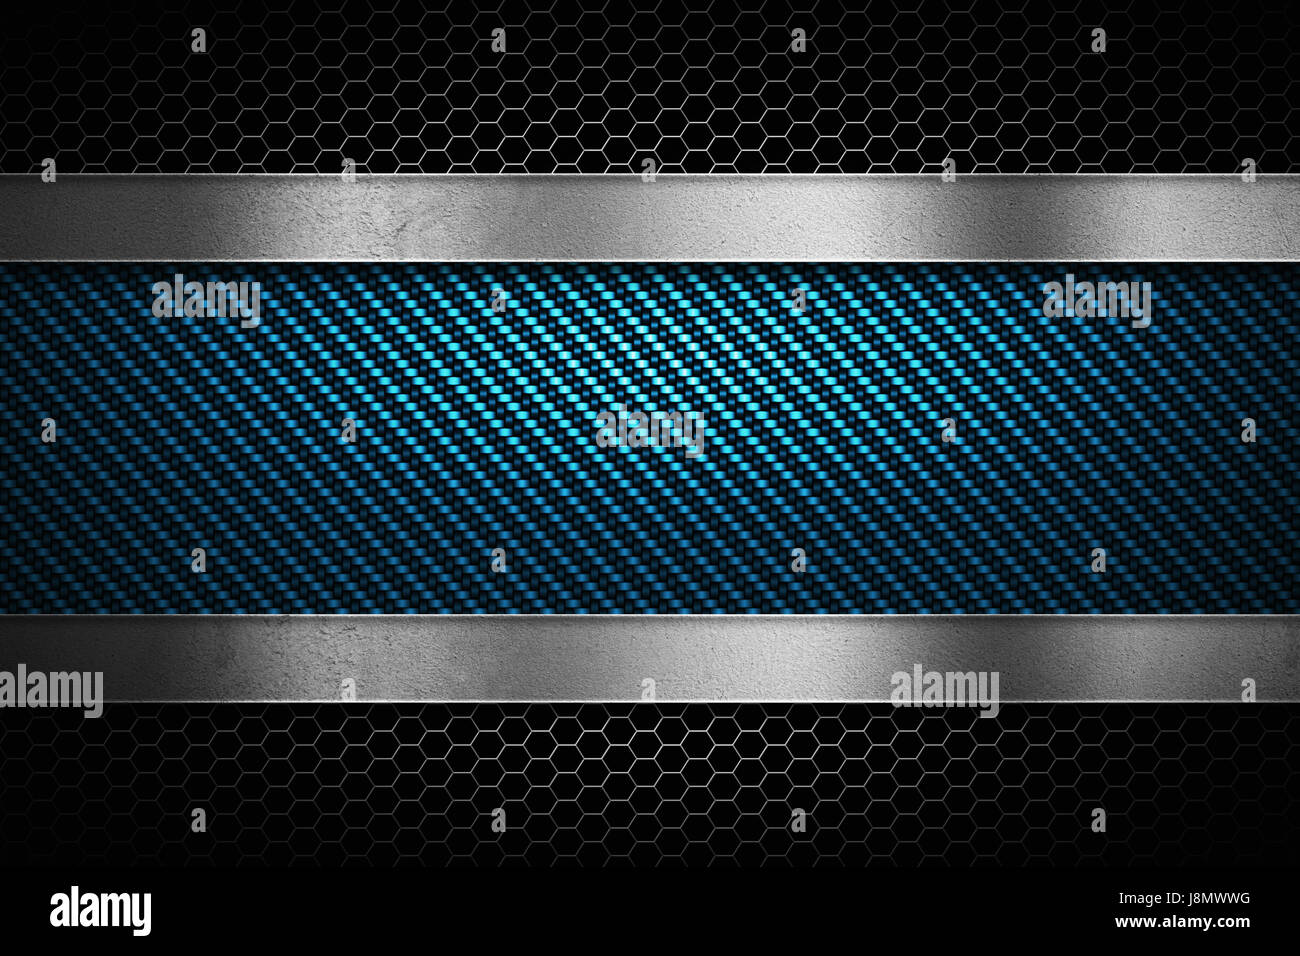 Abstract modern blue carbon fiber with grey perforated metal and polish metal plate textured material design for background, wallpaper, graphic design Stock Photo